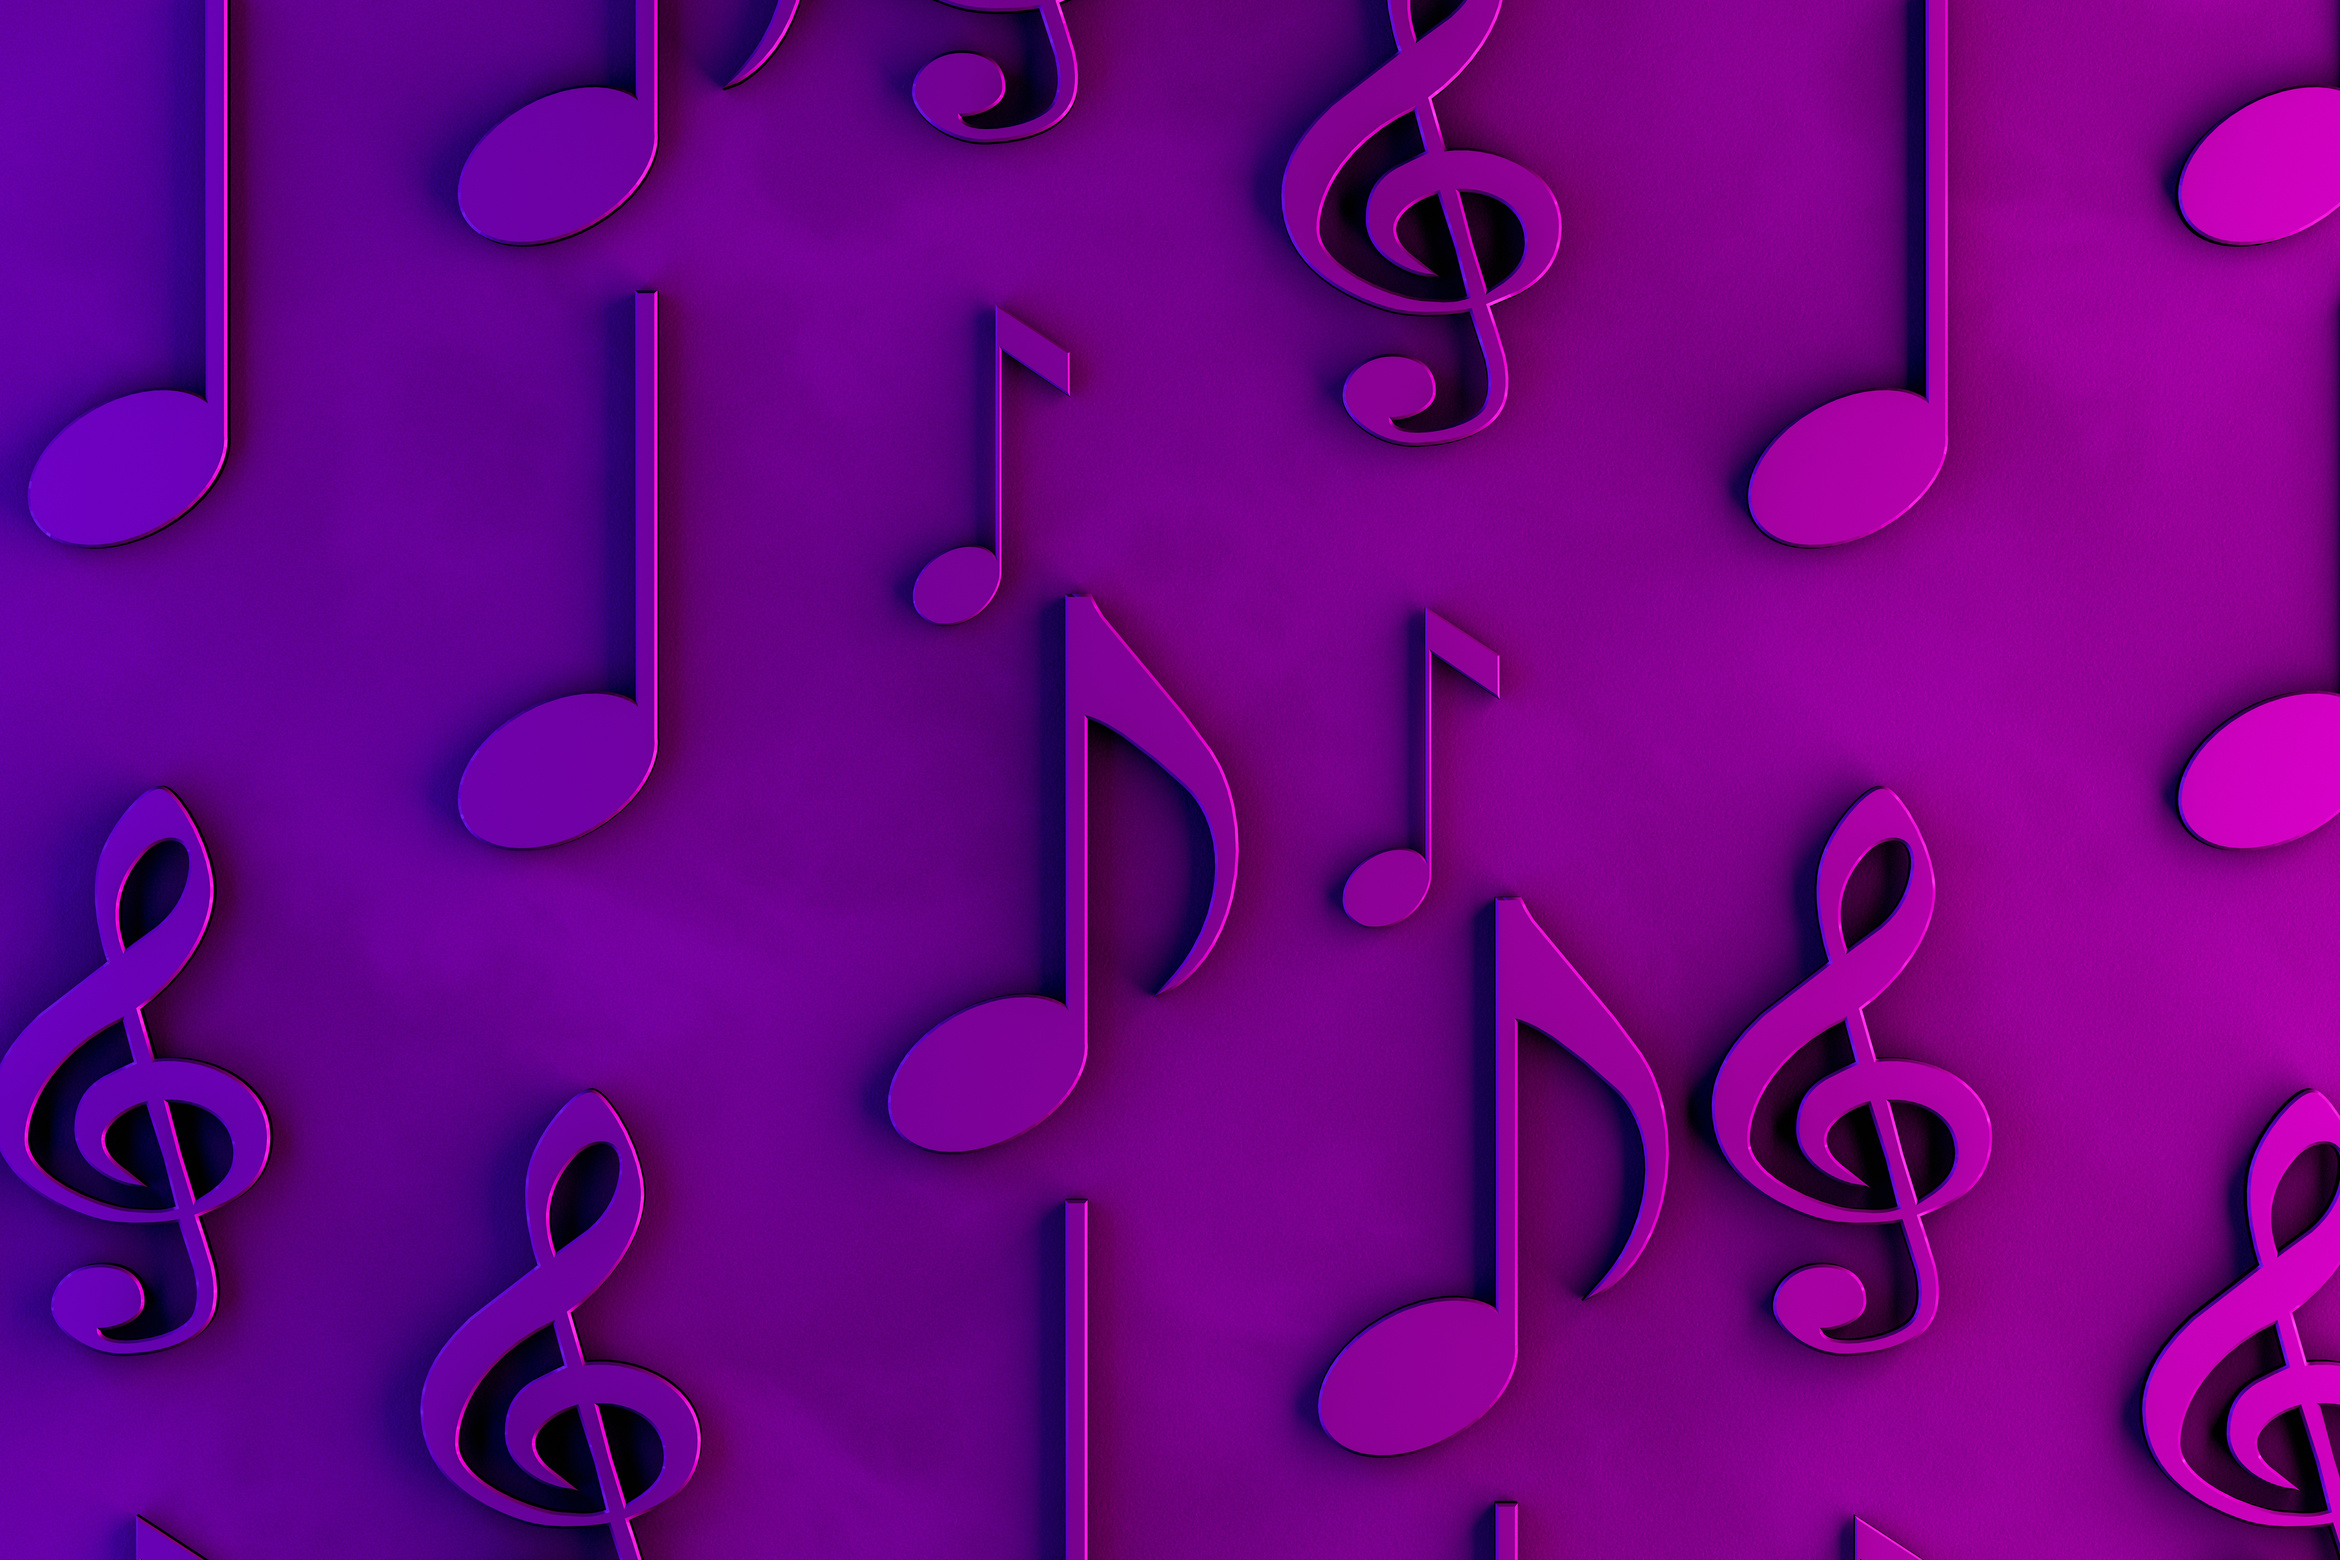 Musical Note Icons and Treble Clef Background with Neon Lights